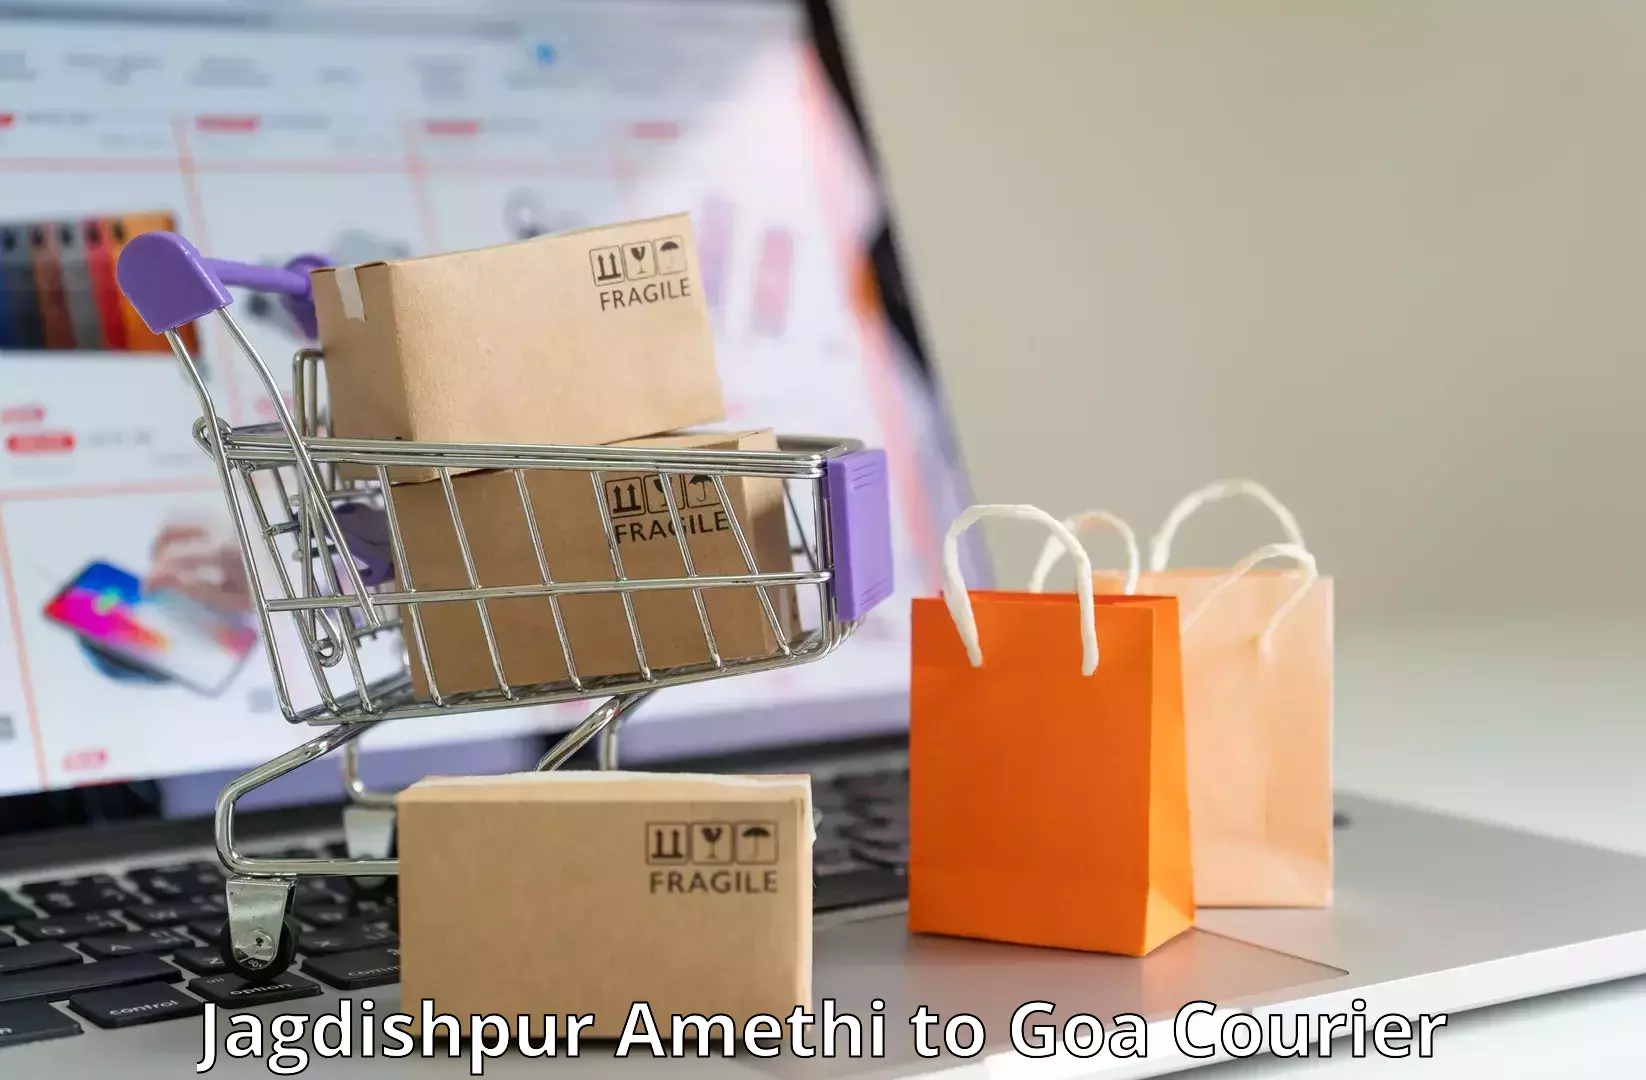 Express package services in Jagdishpur Amethi to Panaji